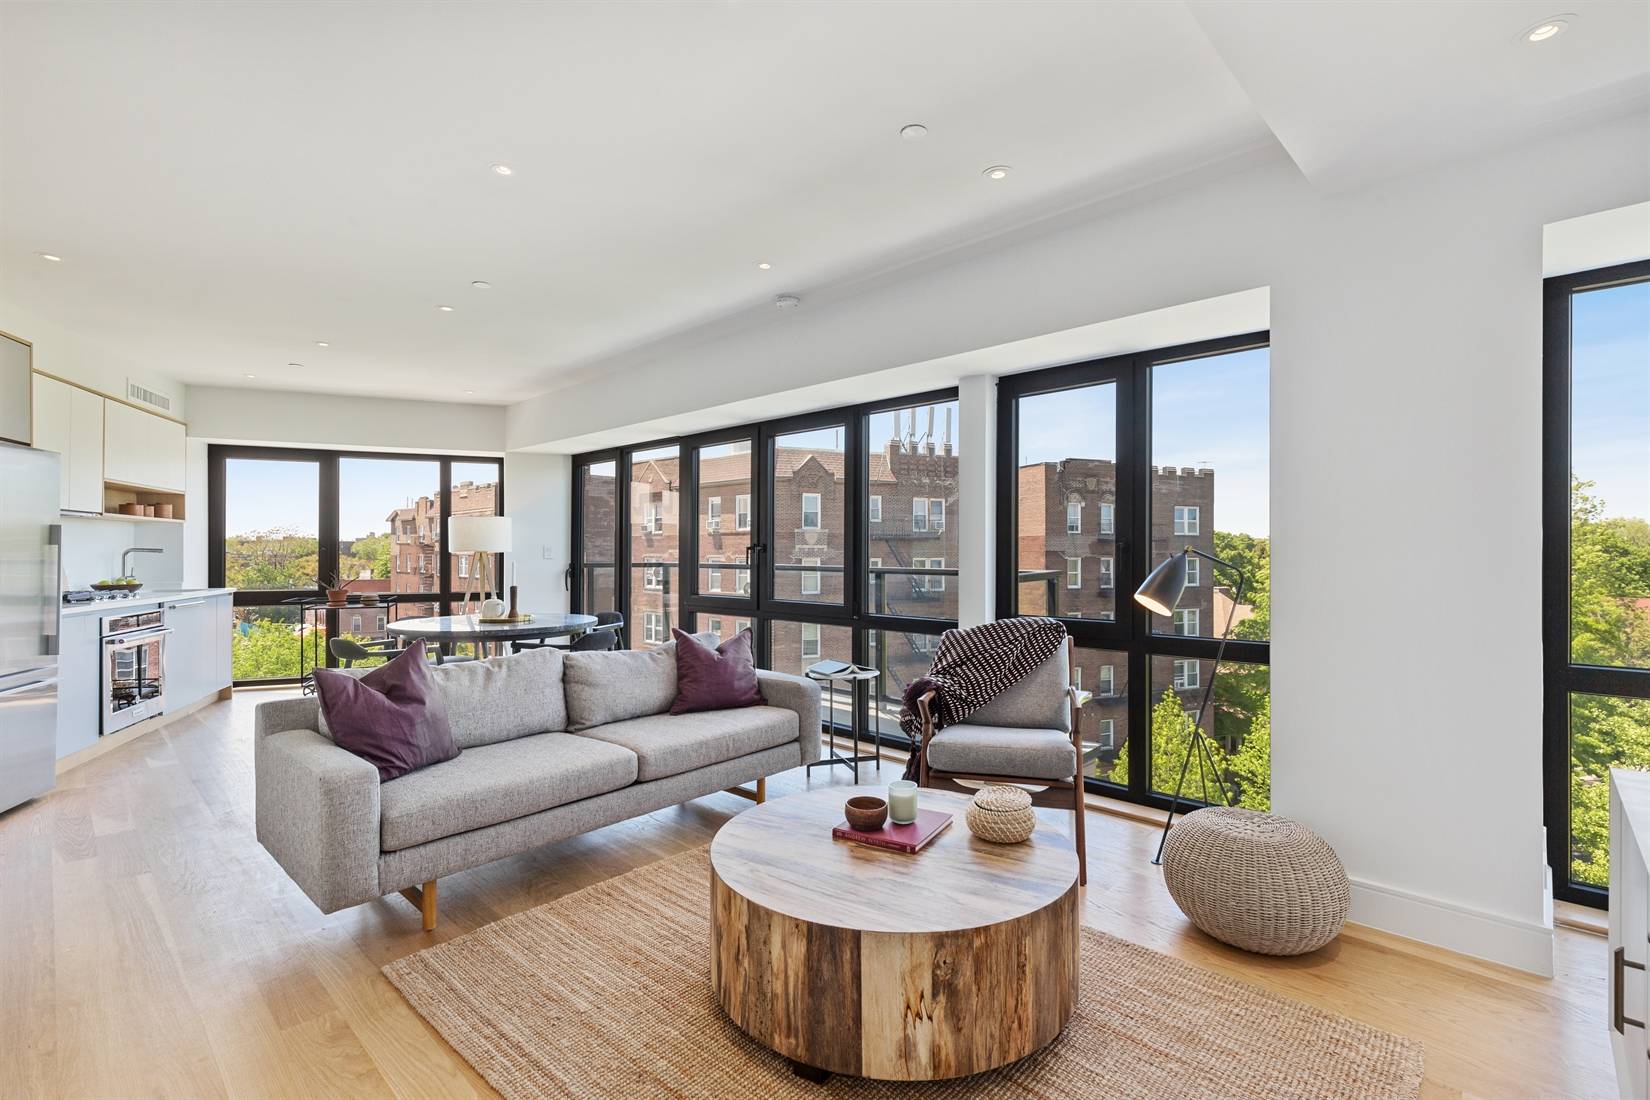 STYLE, QUALITY AND AMENITIES NEVER BEFORE SEEN IN DITMAS PARK Residence 6B at 1702 Newkirk Avenue is a top floor 2 bedroom, 2 bathroom condo with 2 private balconies and ...